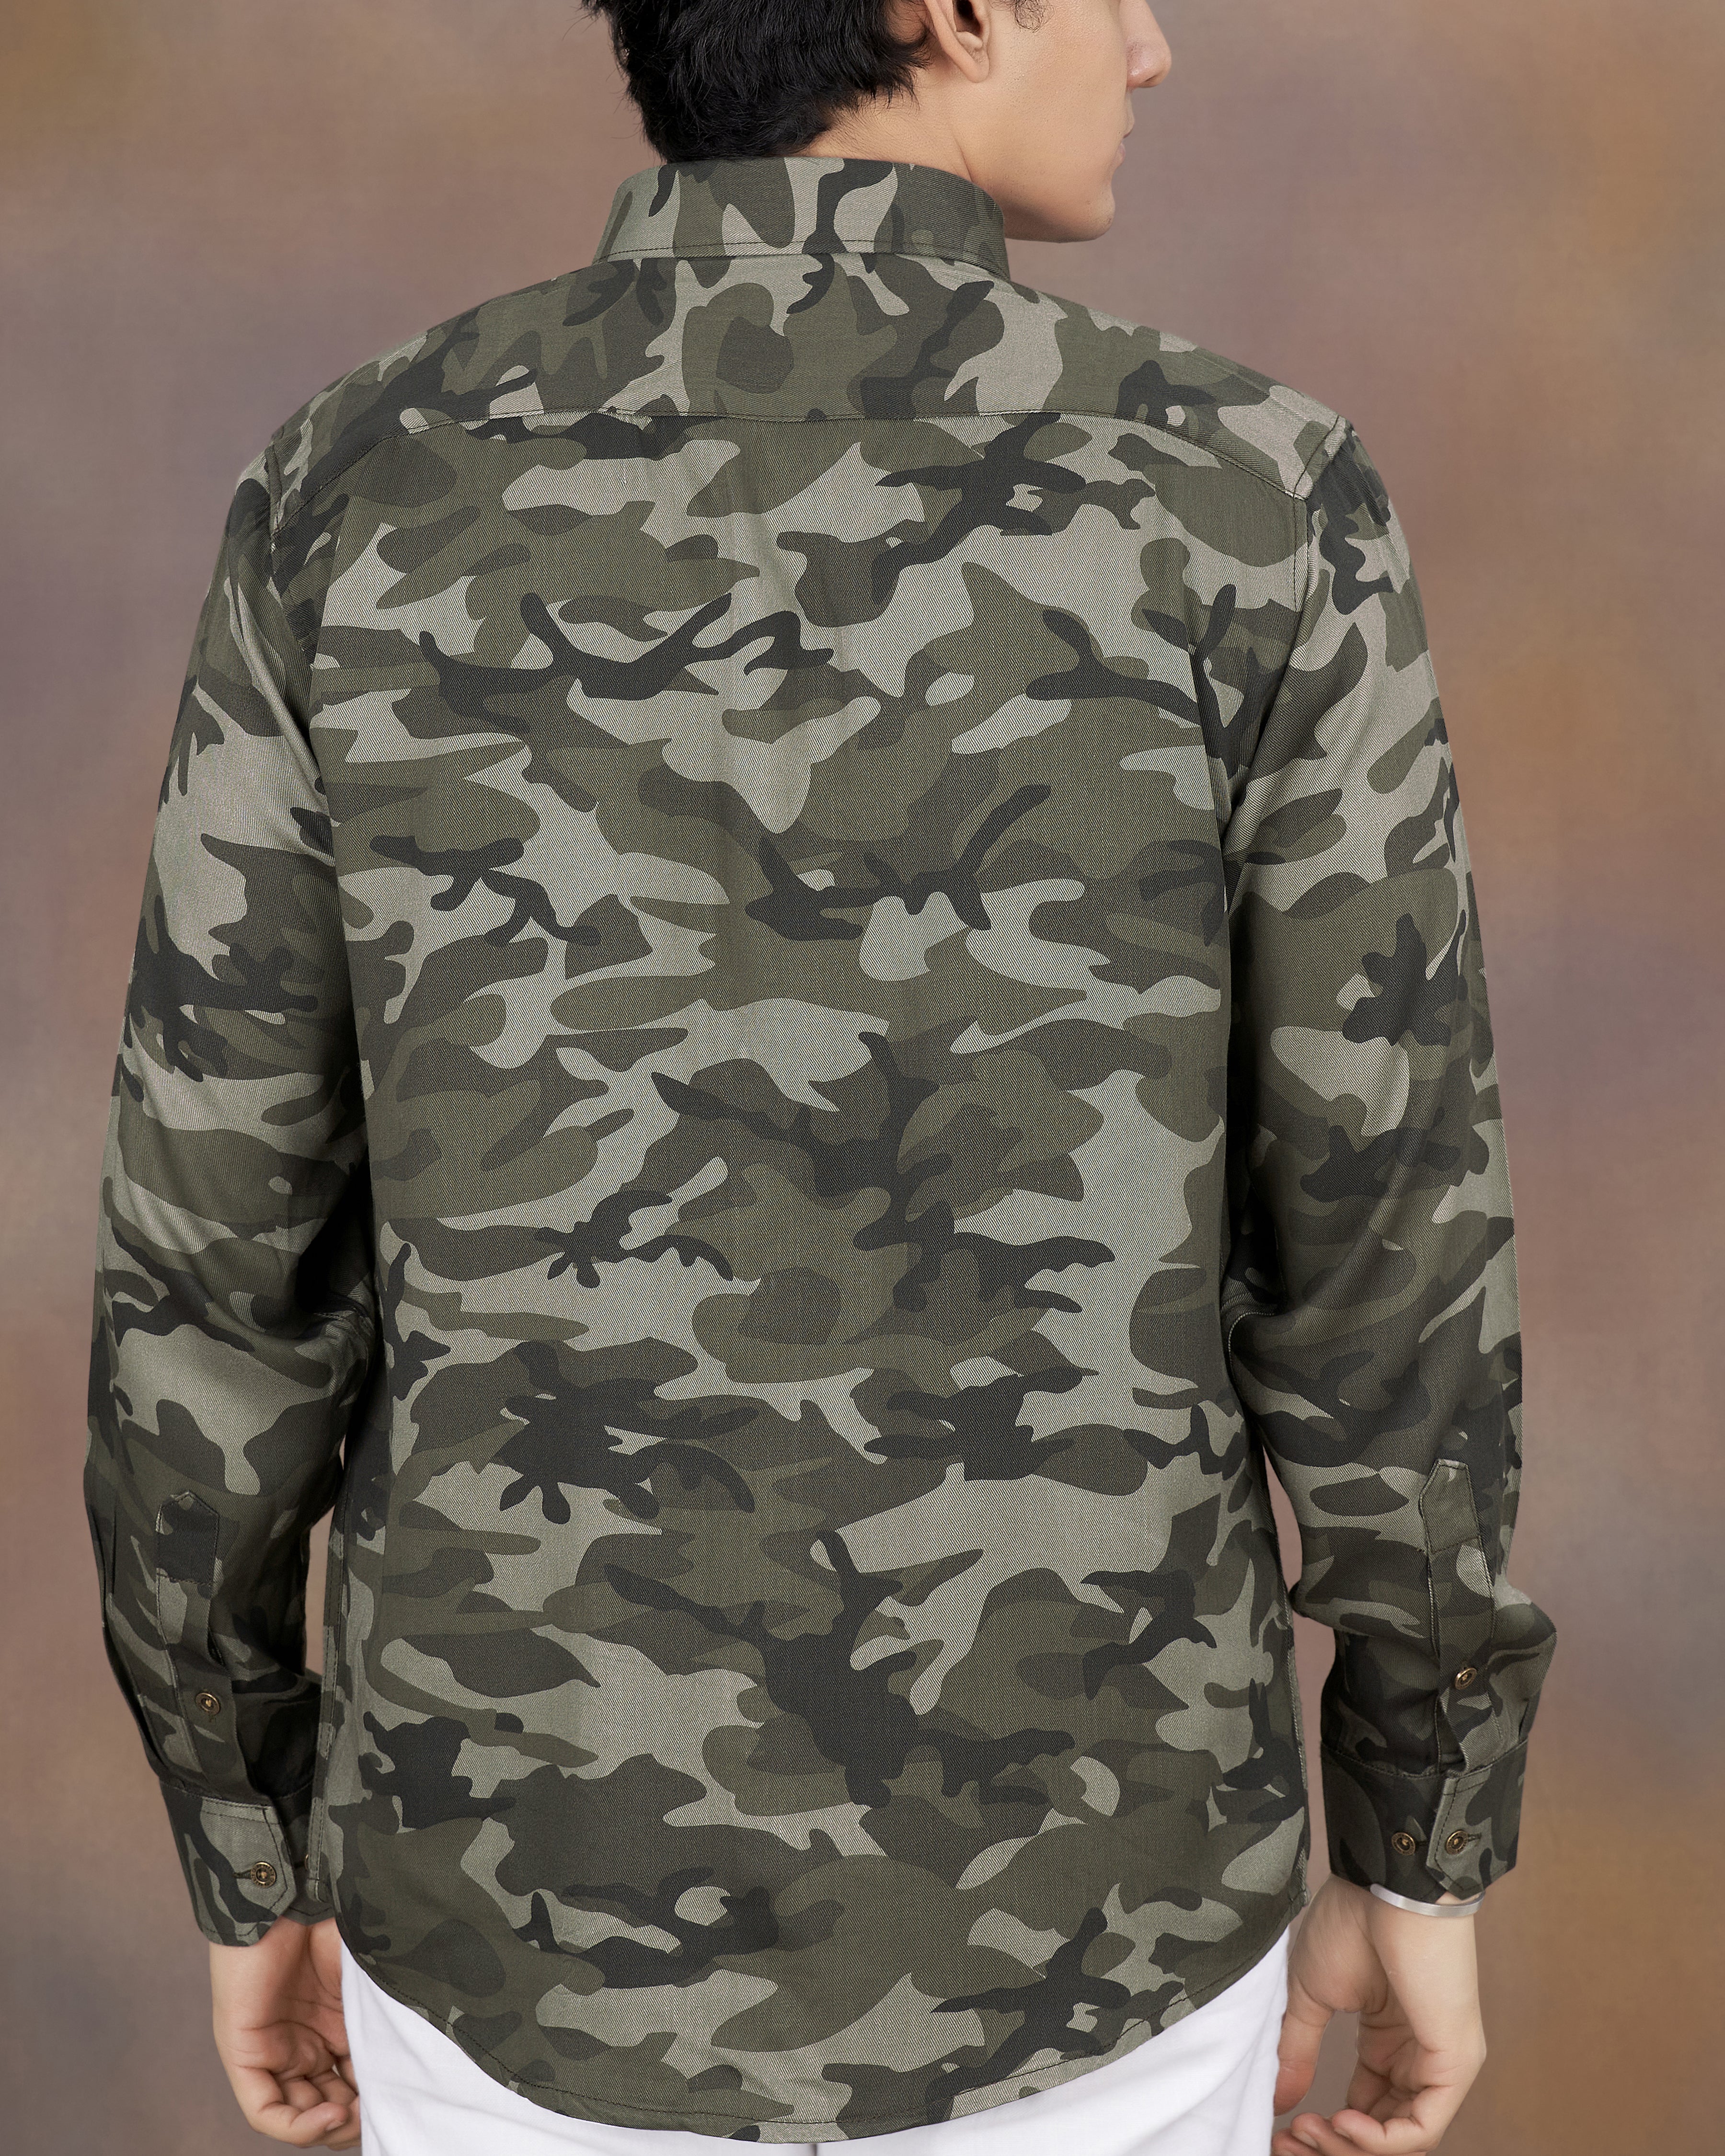 Lunar Green with Concord Gray Camouflage Printed  Premium Tencel Shirt